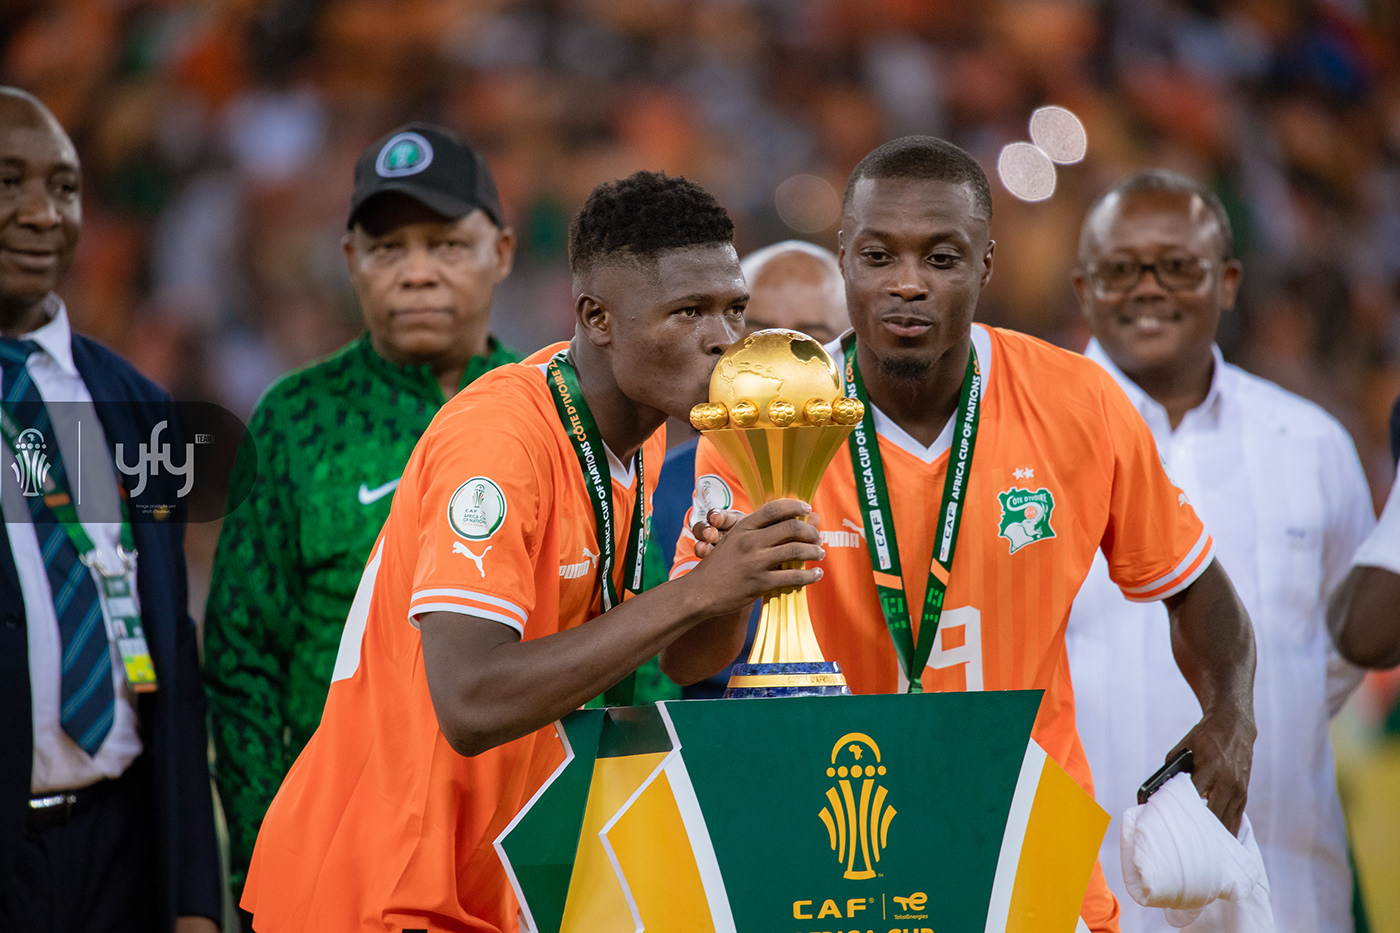 football sports africa nigeria Cote d'Ivoire abidjan coupe d'afrique AFCON FIFA world cup